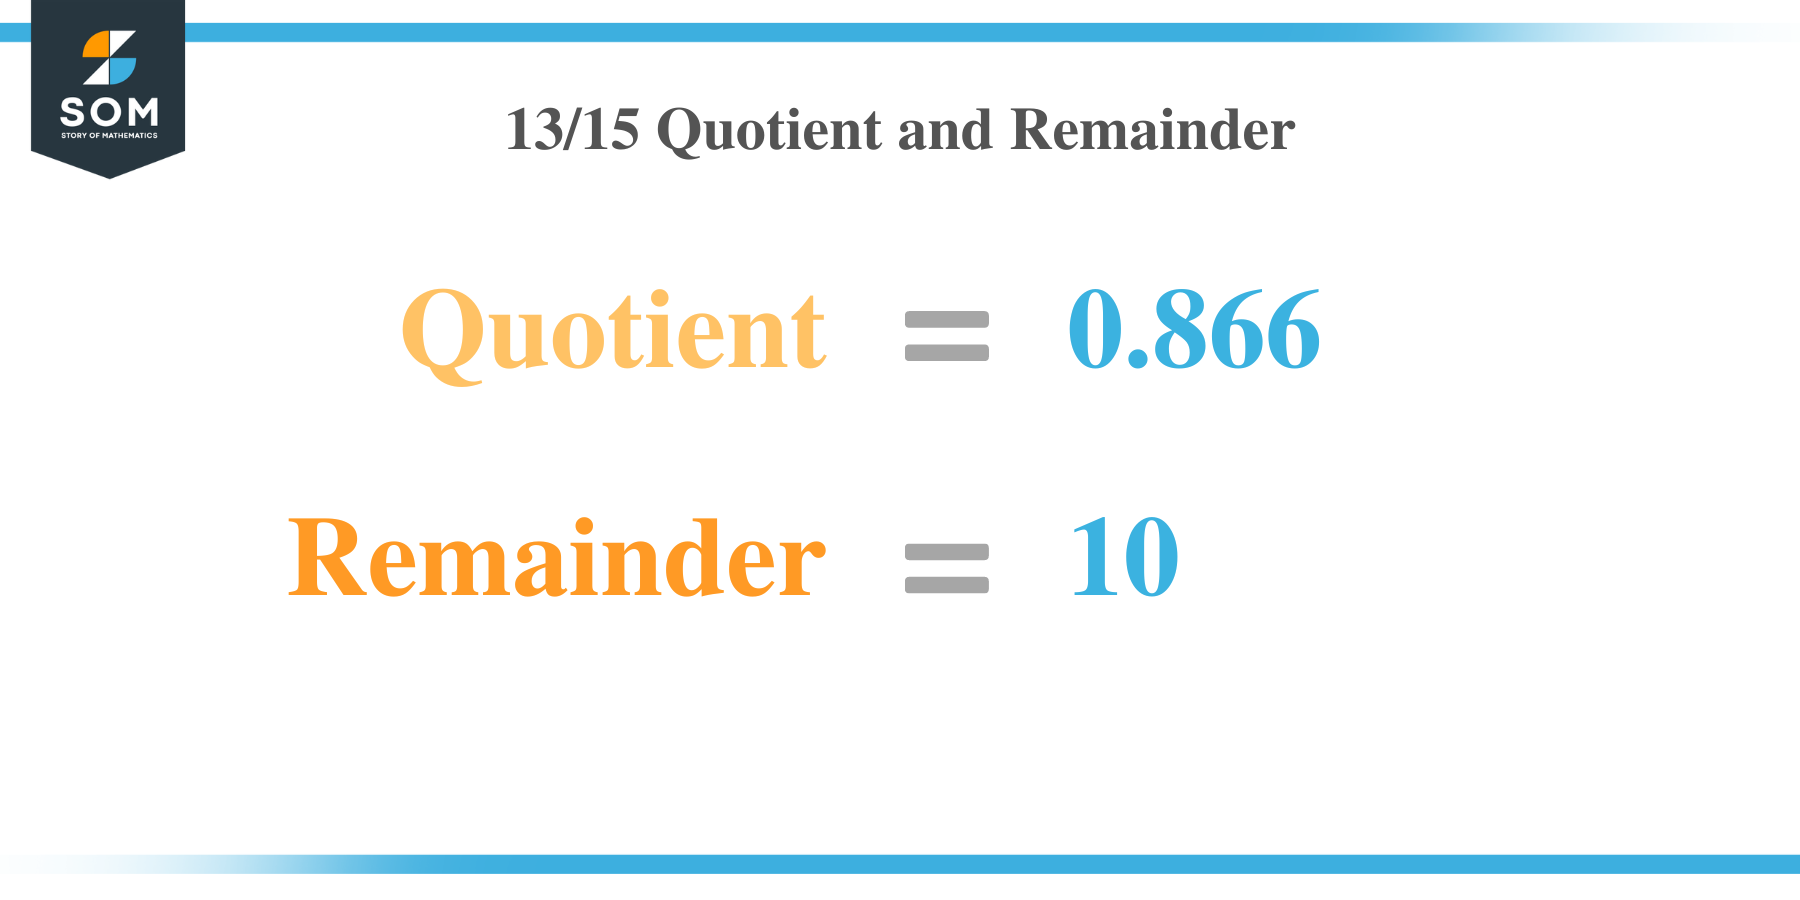 13 by 15 Quotient and Remainder